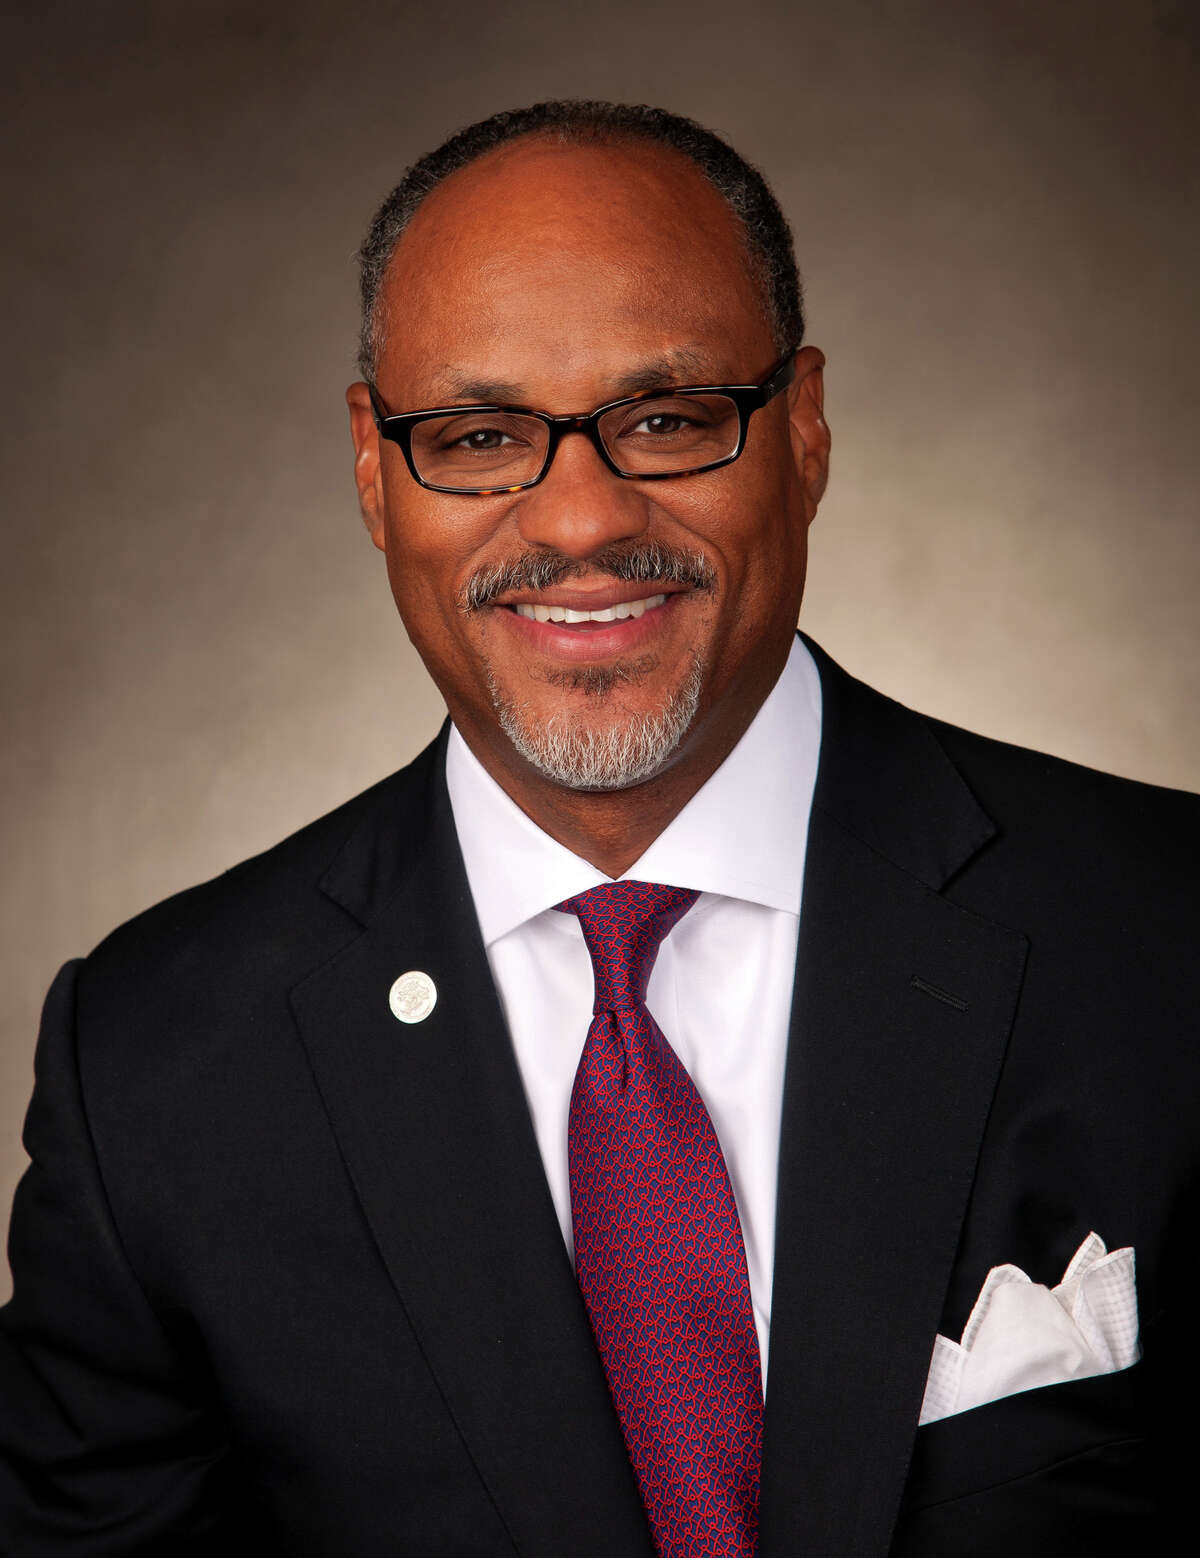 Bracewell & Giuliani Partner Jarvis V. Hollingsworth has been elected chairman of the University of Houston System Board of Regents for fiscal year 2014.